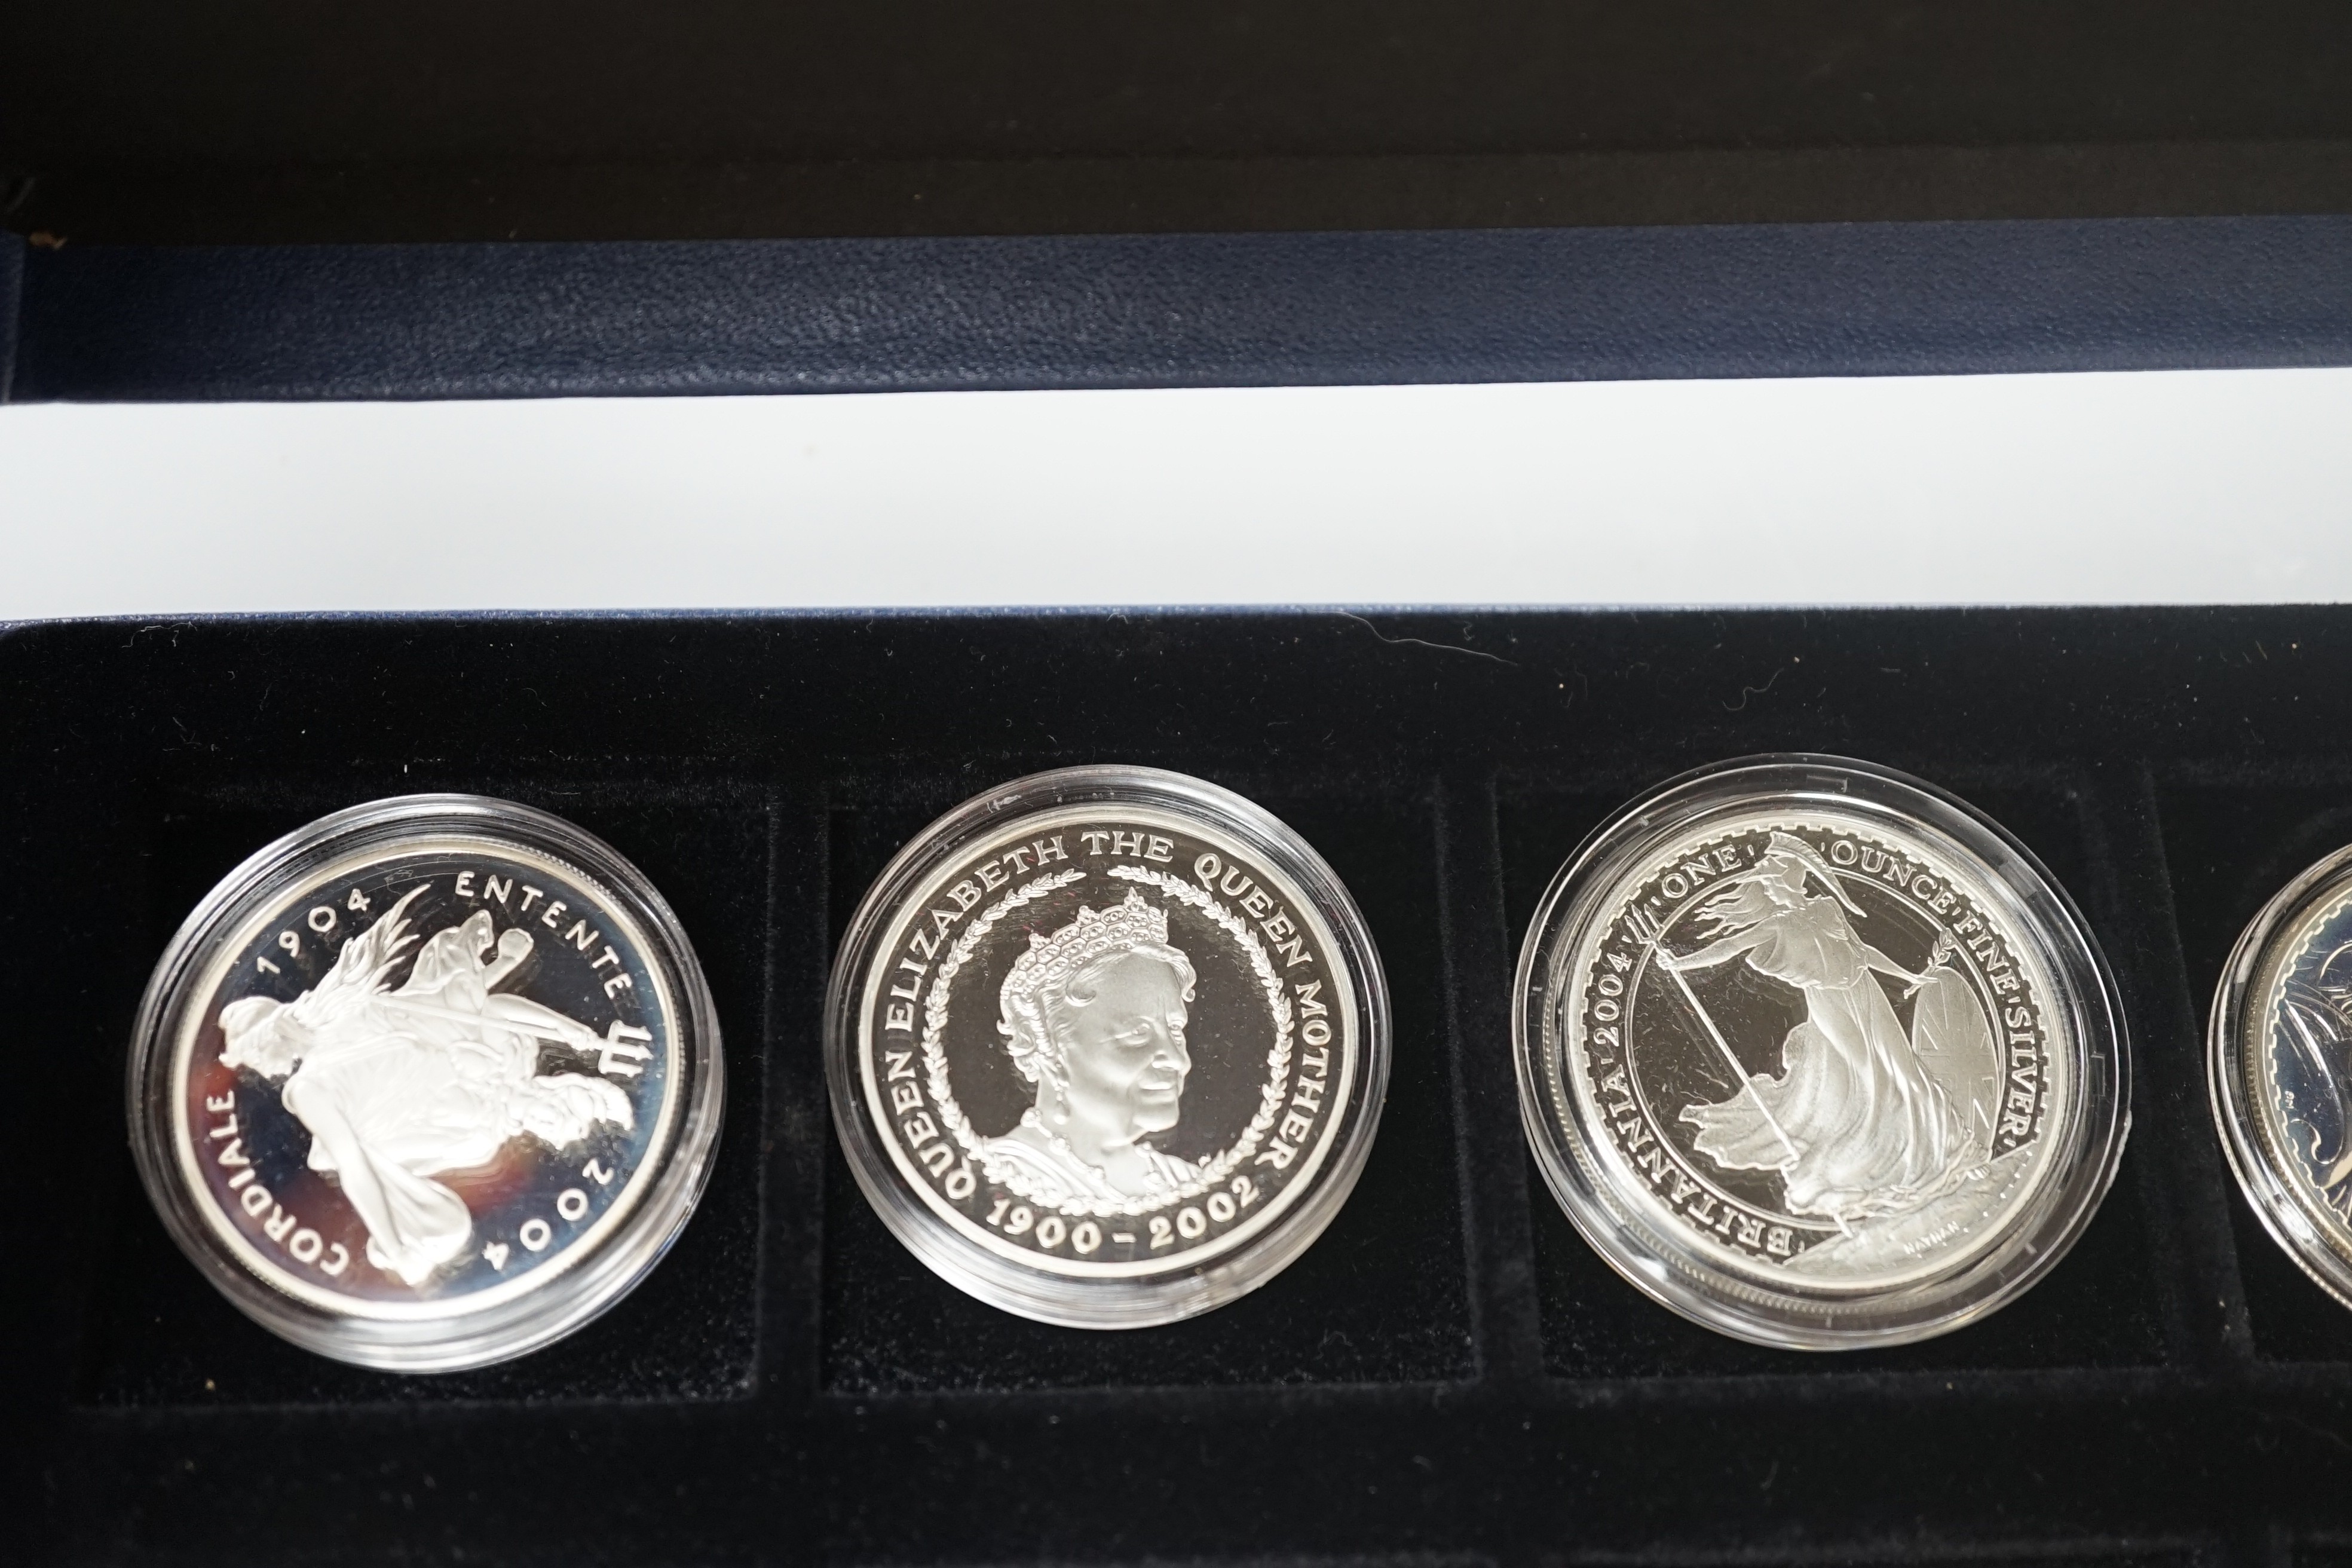 A group of coins including 1898 British Trade One Dollar, Royal Mint UK two QEII five shillings, 1935 crown, 1890 crown, silver proof coins - five 1oz. silver Britannia £2 coins 1998-2000, 2003, 2004, 2002 Queen Mother £